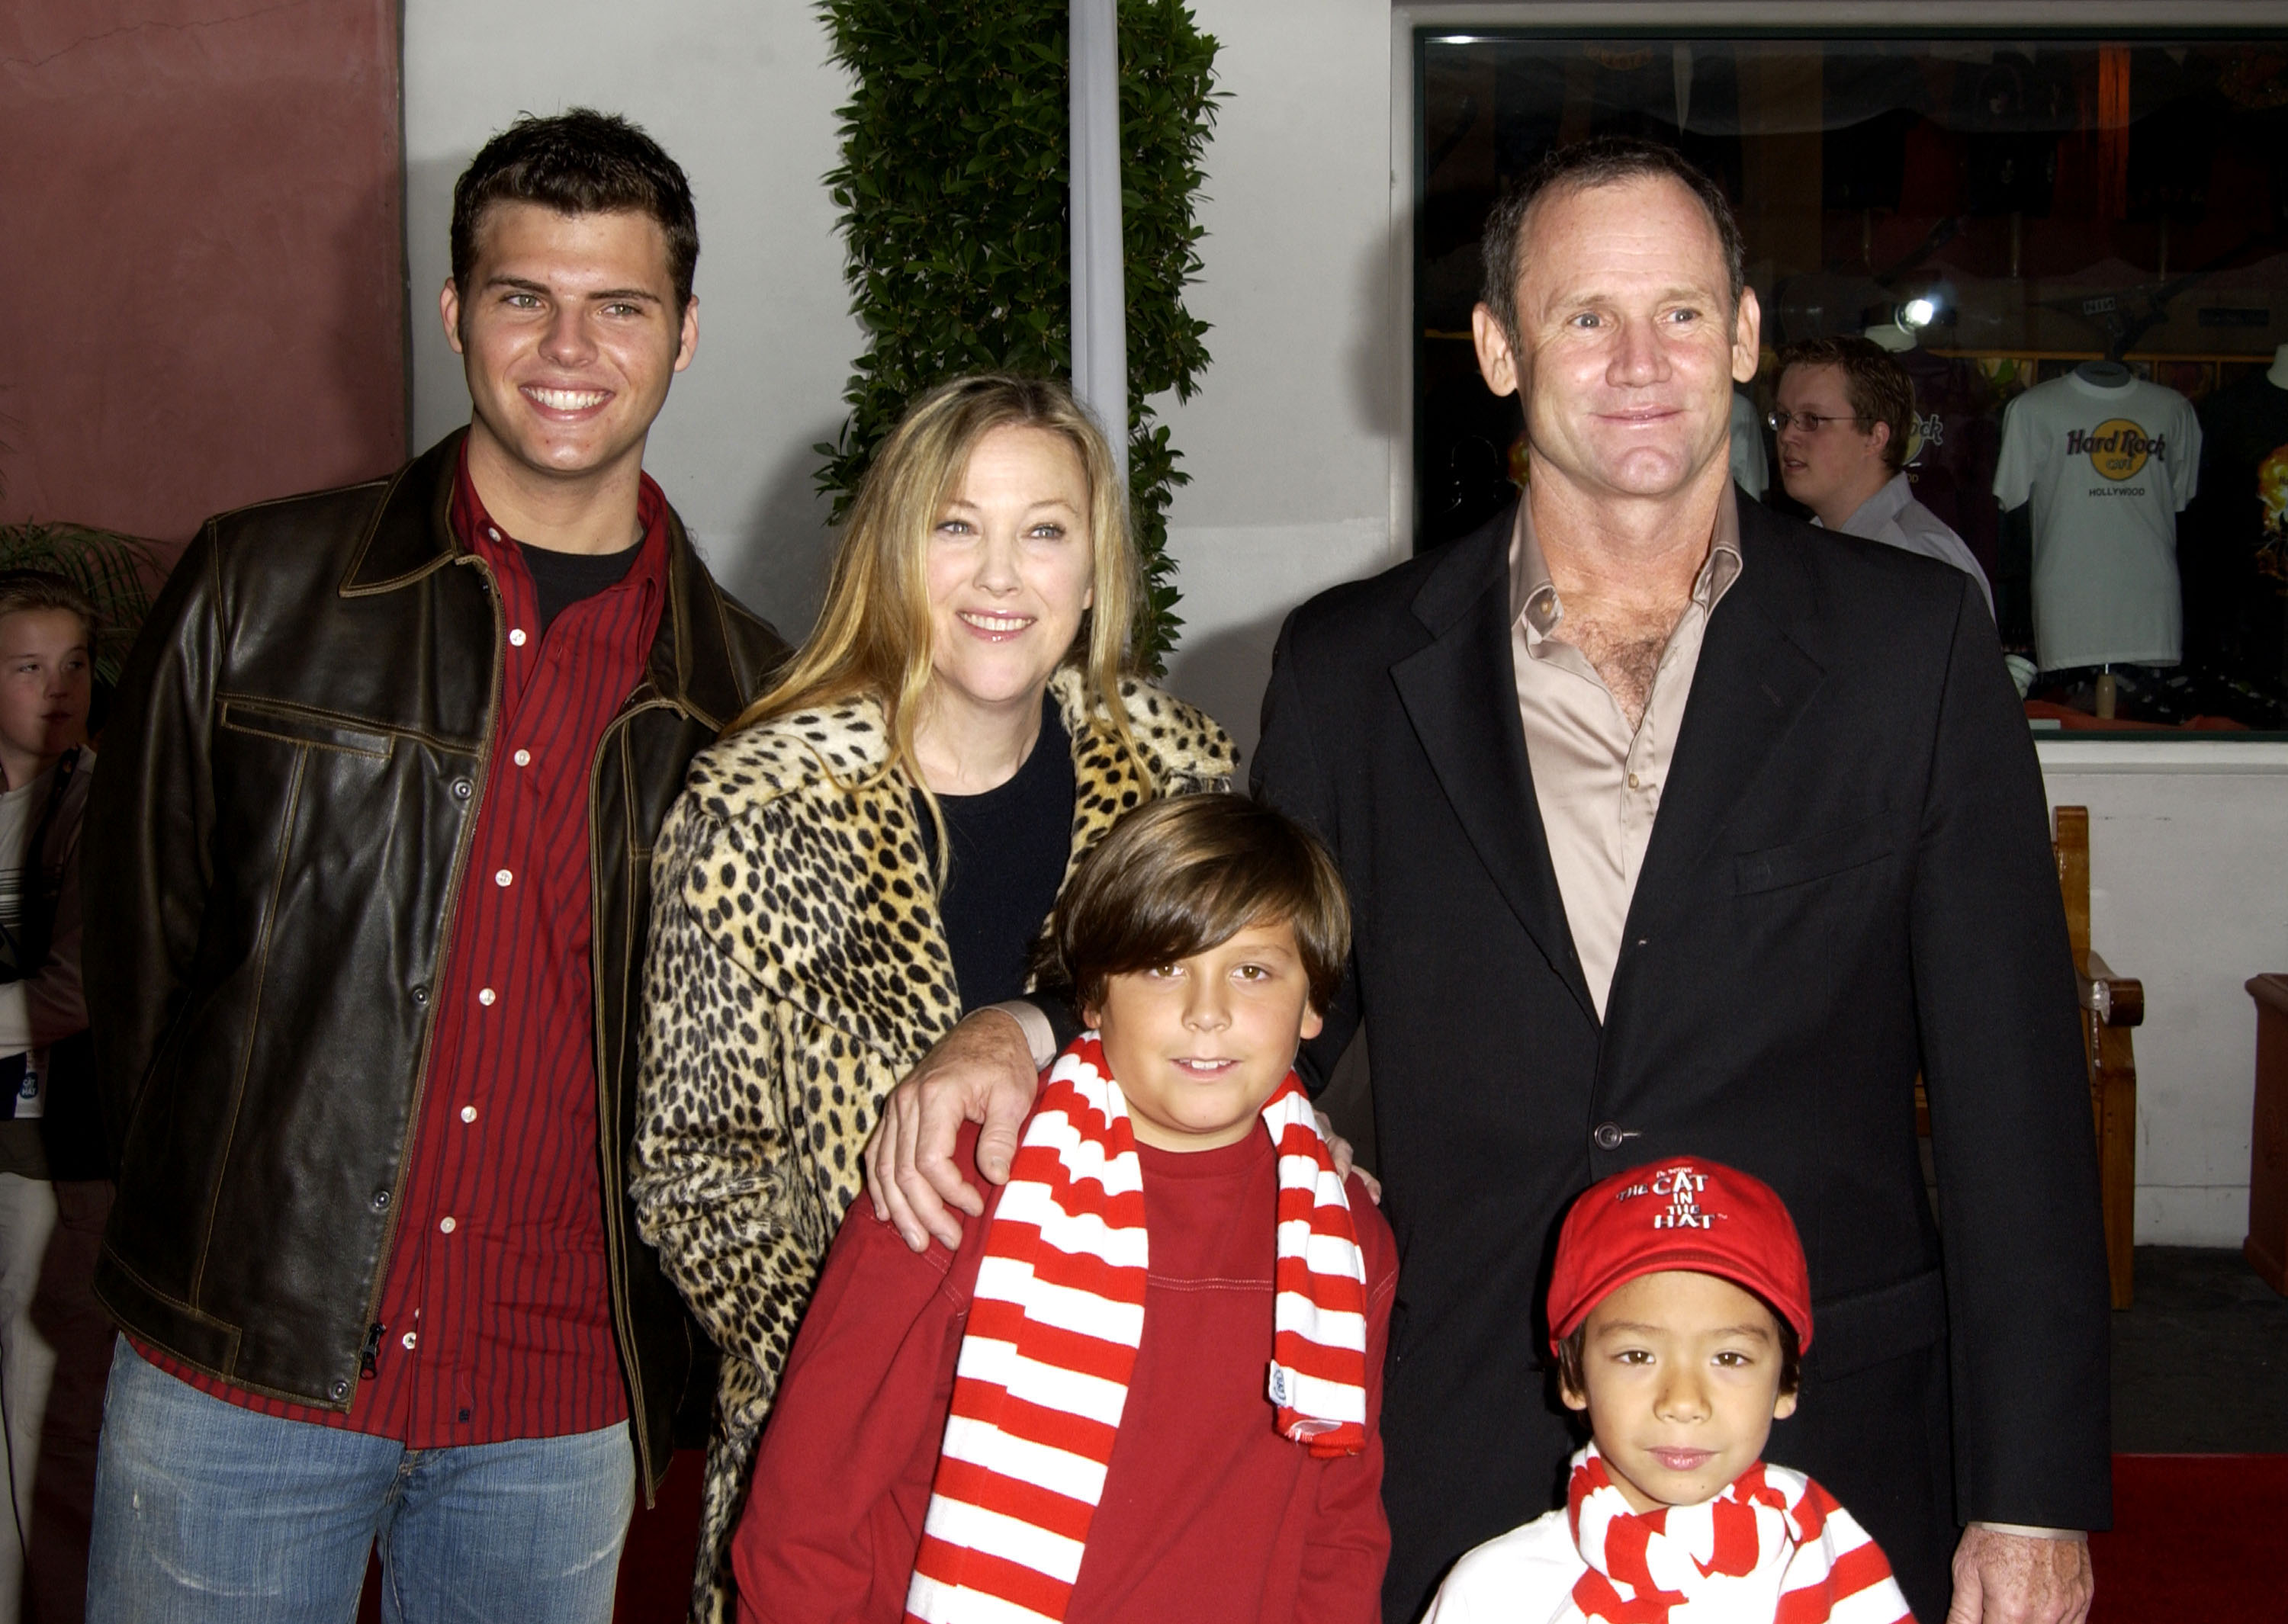 Catherine O'Hara, Bo Welch and family during "The Cat In The Hat" World Premiere at Universal Studios Cinema on November 8, 2003 in Universal City, California | Source: Getty Images